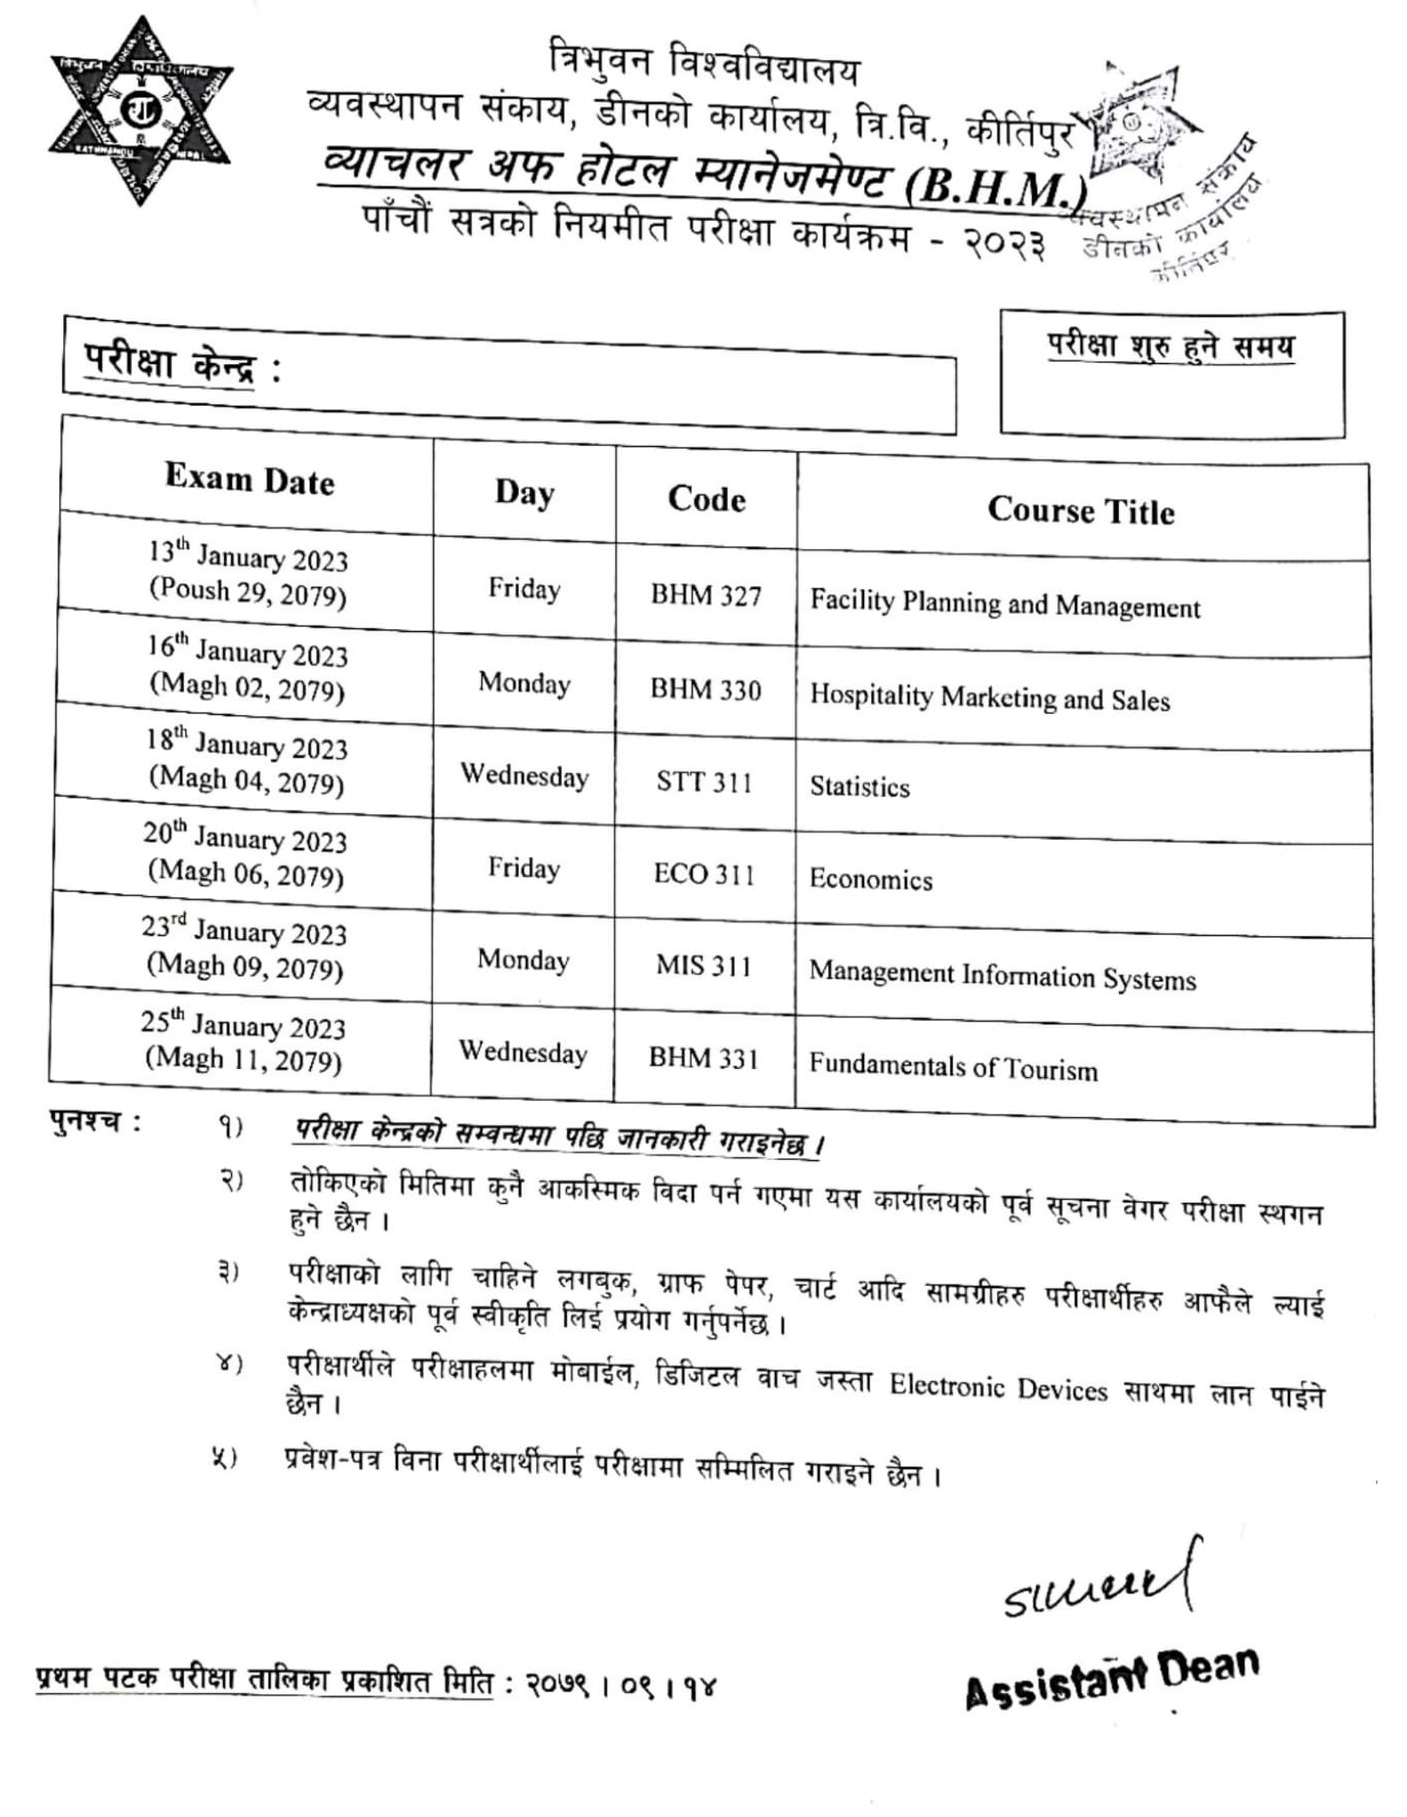 Tribhuvan University Faculty of Management, Dean's Office, TU, Kirtipur has published the examination schedule for Bachelor of Hotel Management (B.H.M.) 5th semester regular examination program 2023.